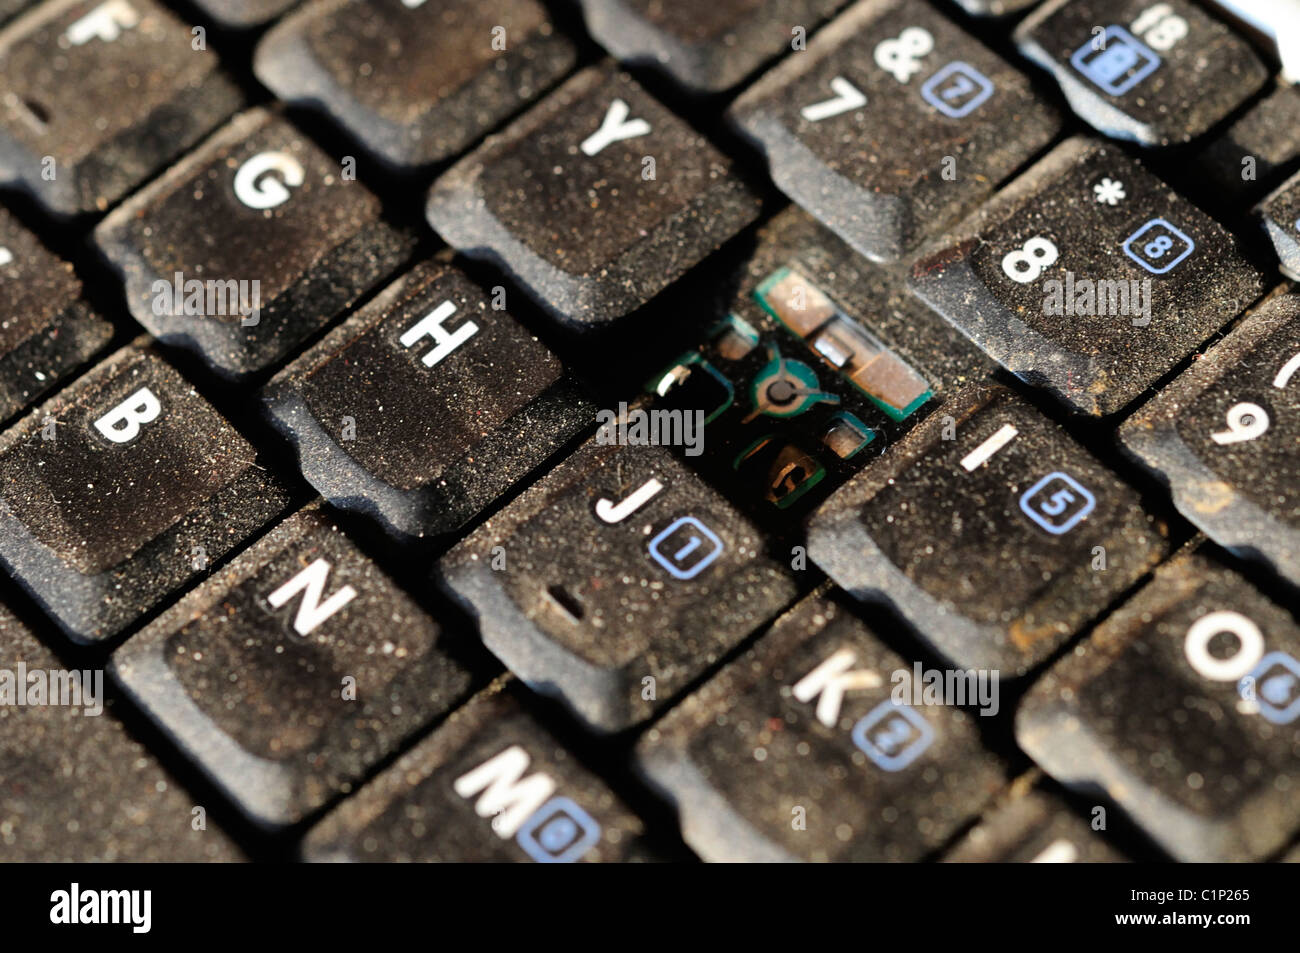 A dusty notebook keyboard with the letter 'U' missing. Stock Photo